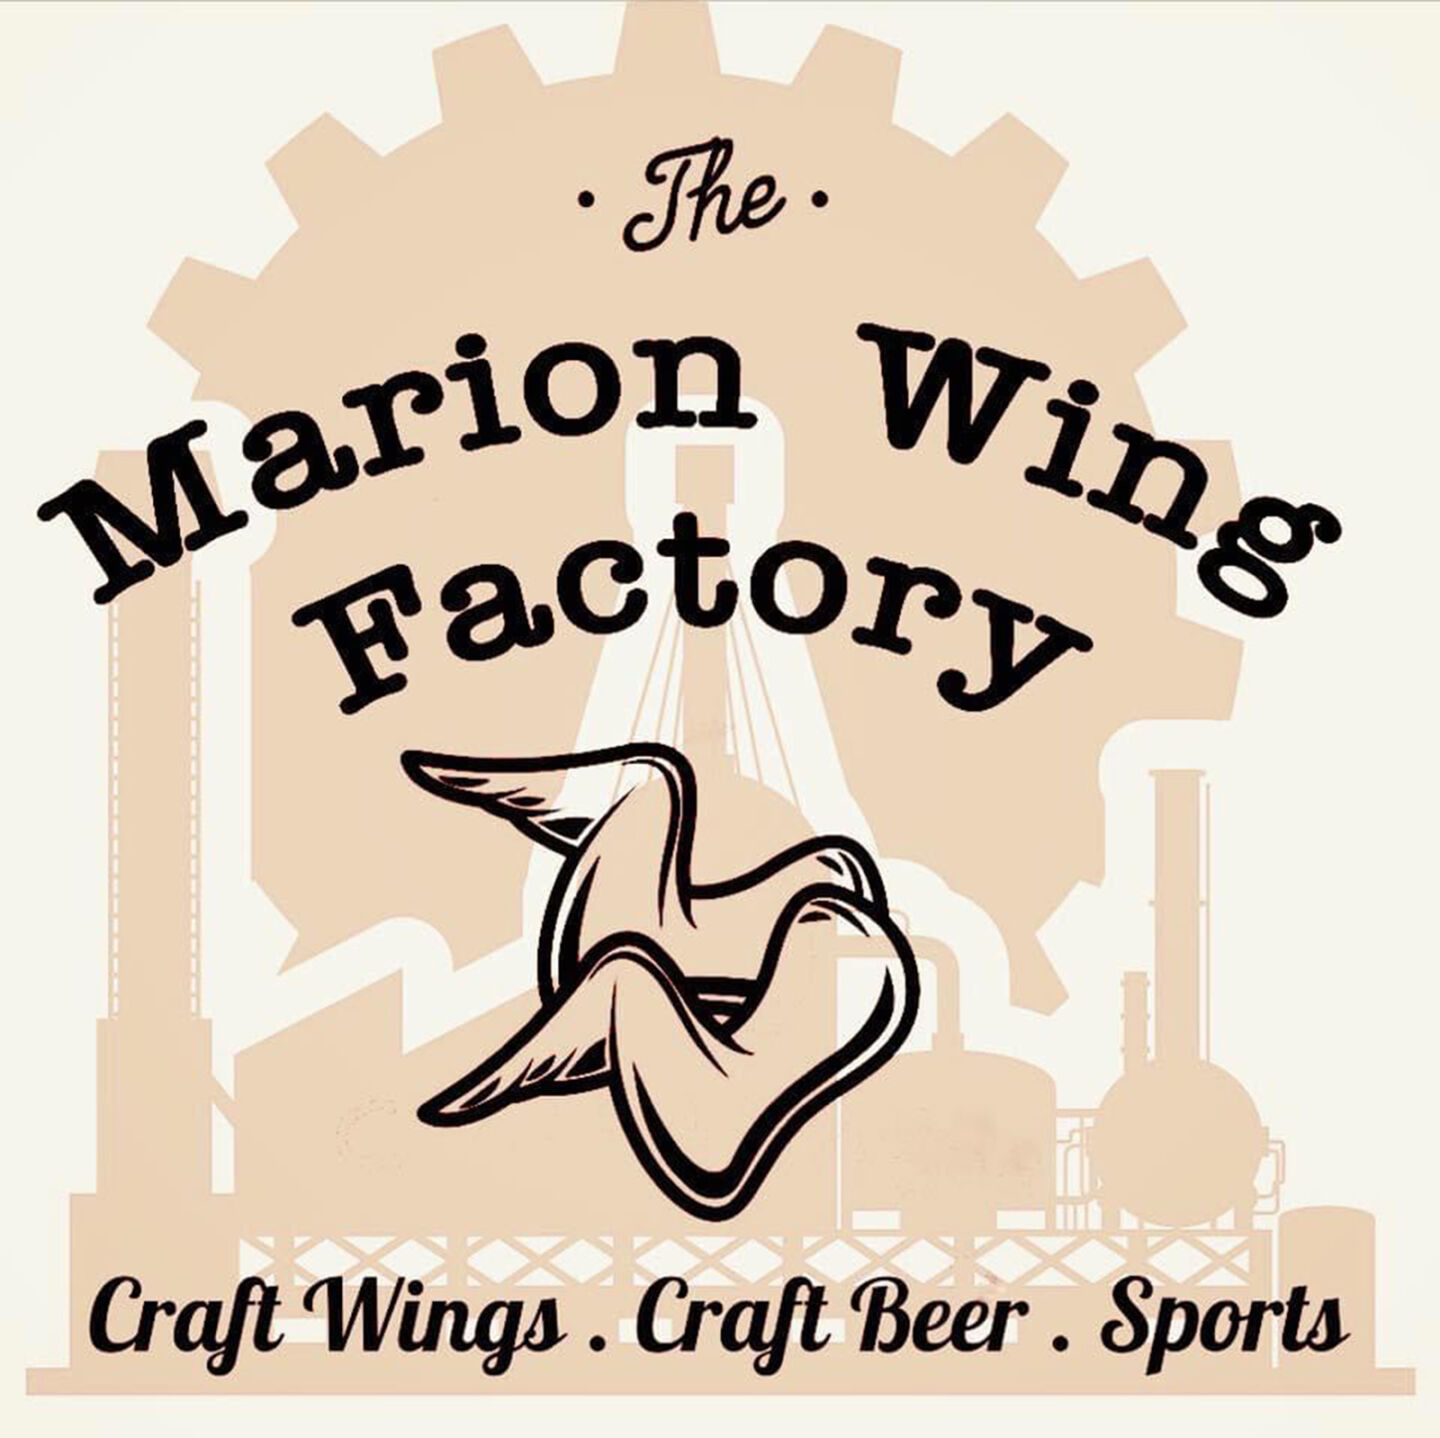 wing factory